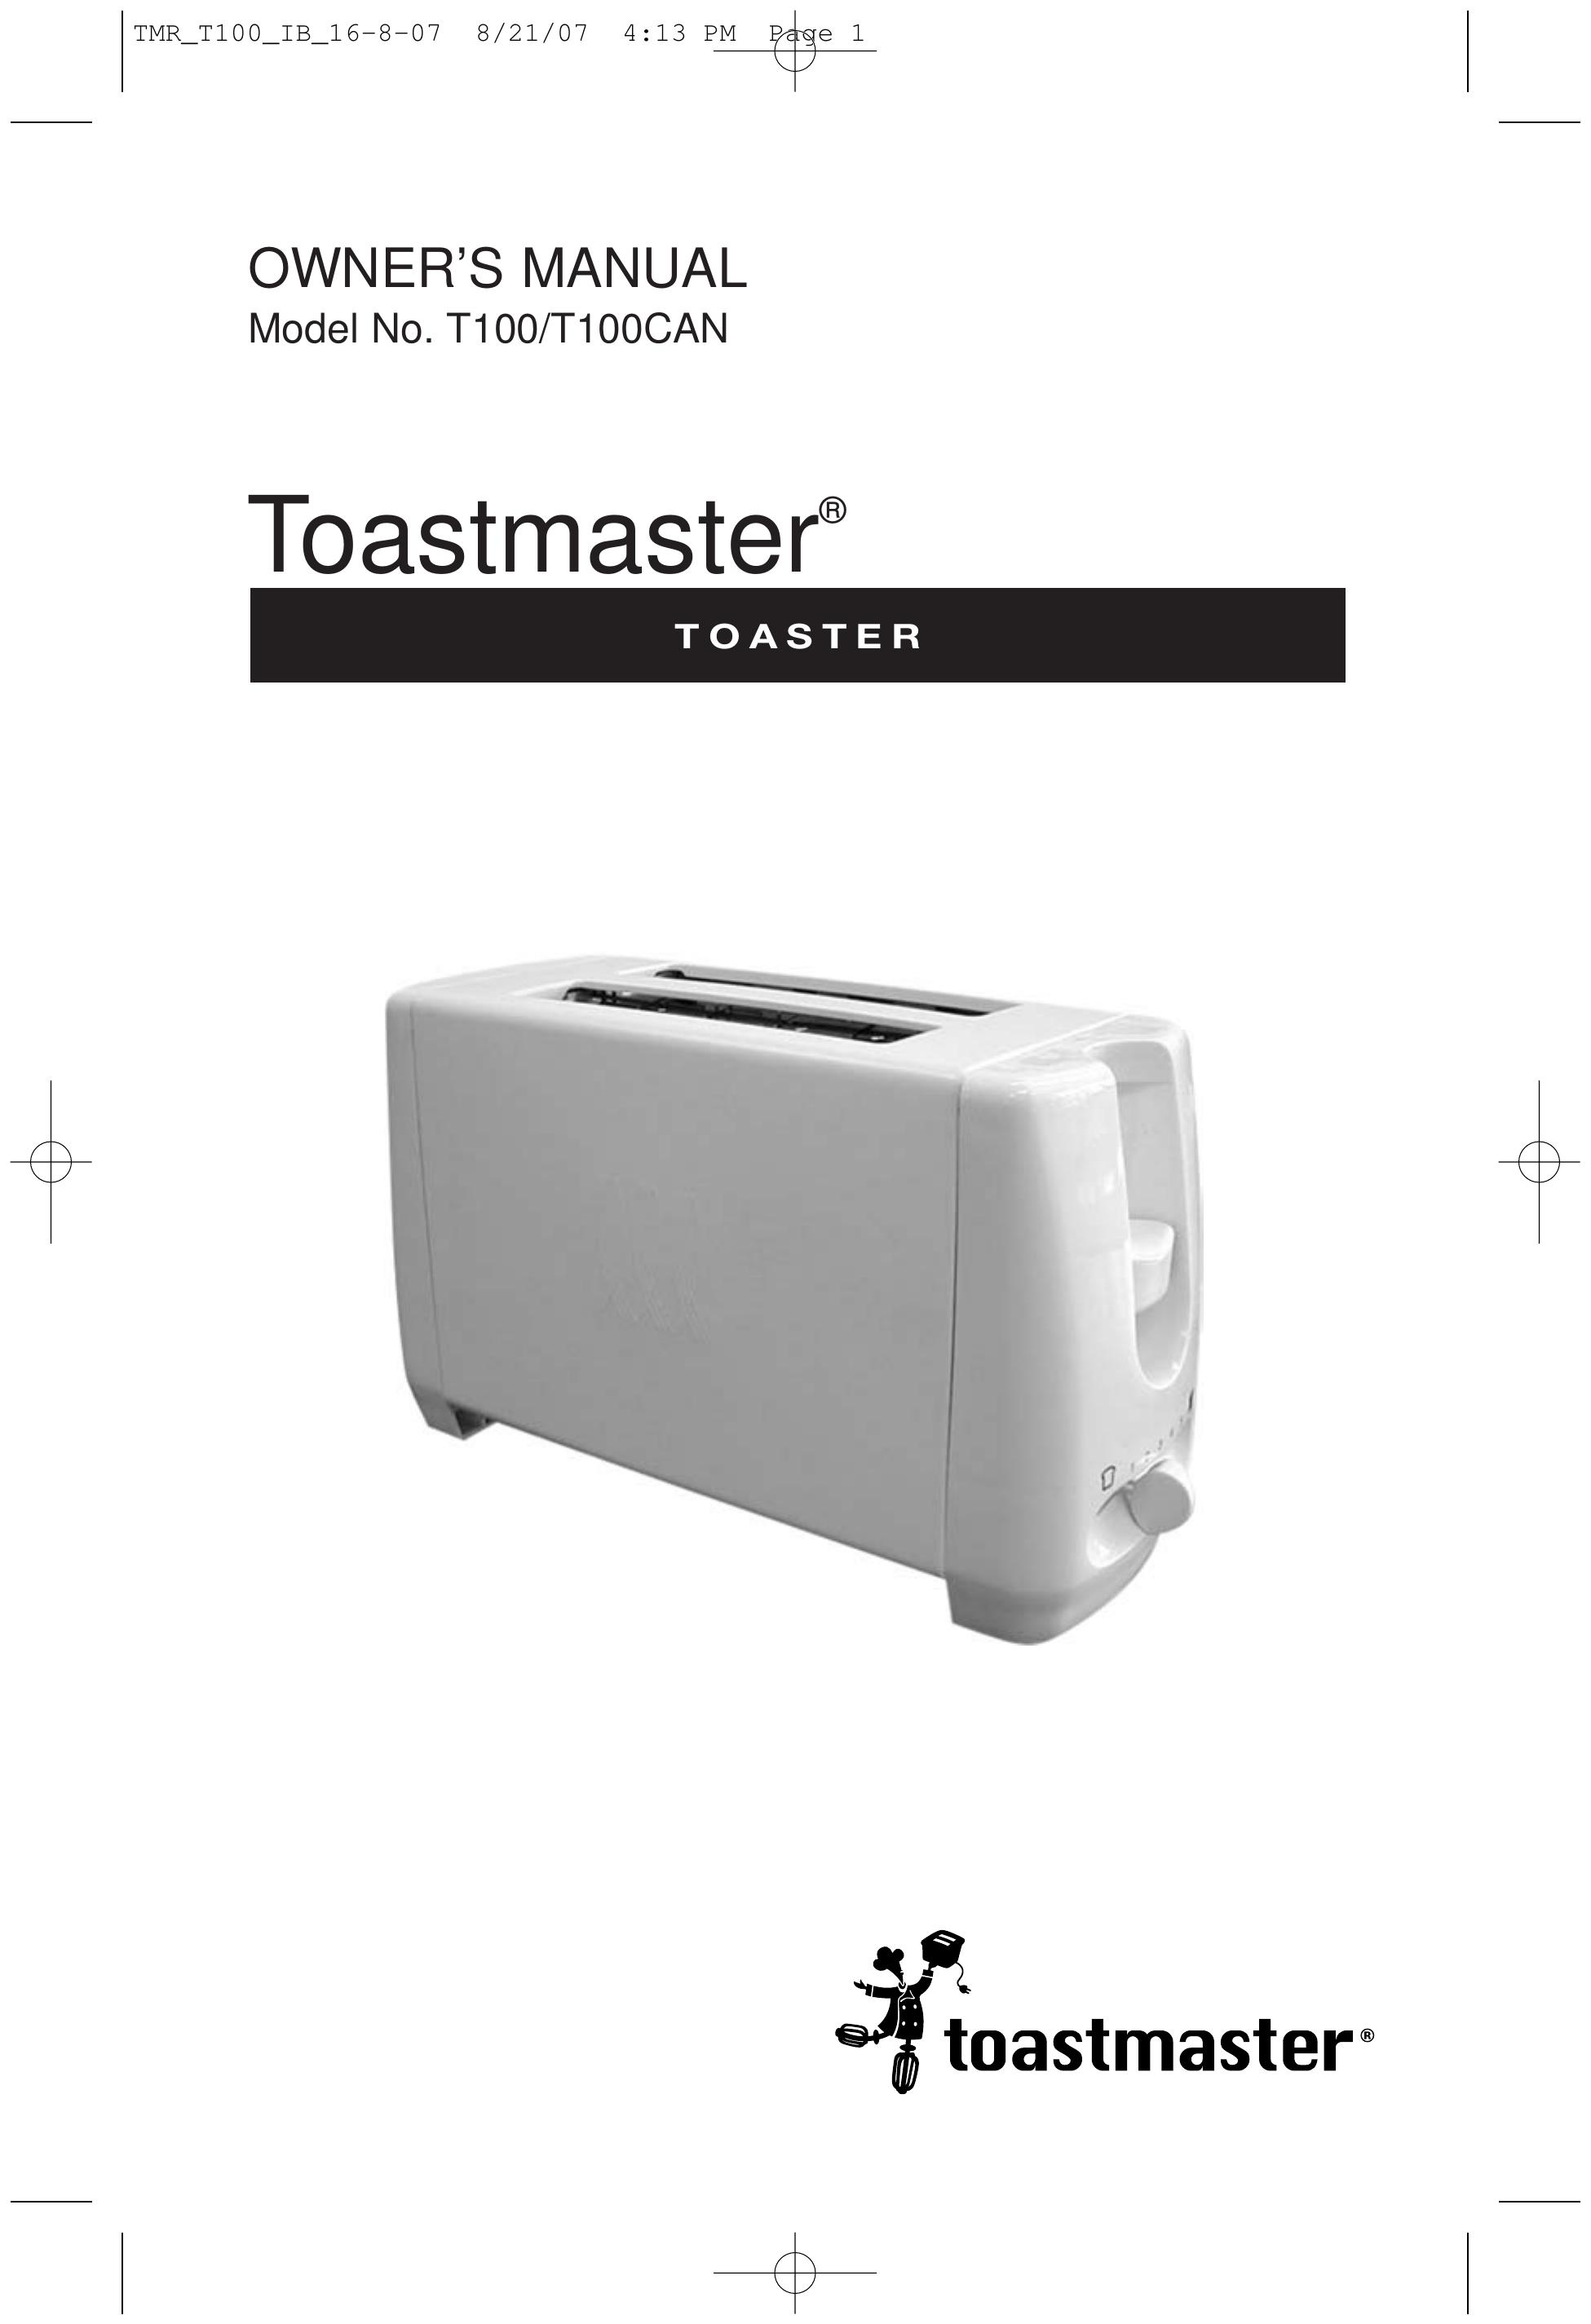 Toastmaster T100 Toaster User Manual